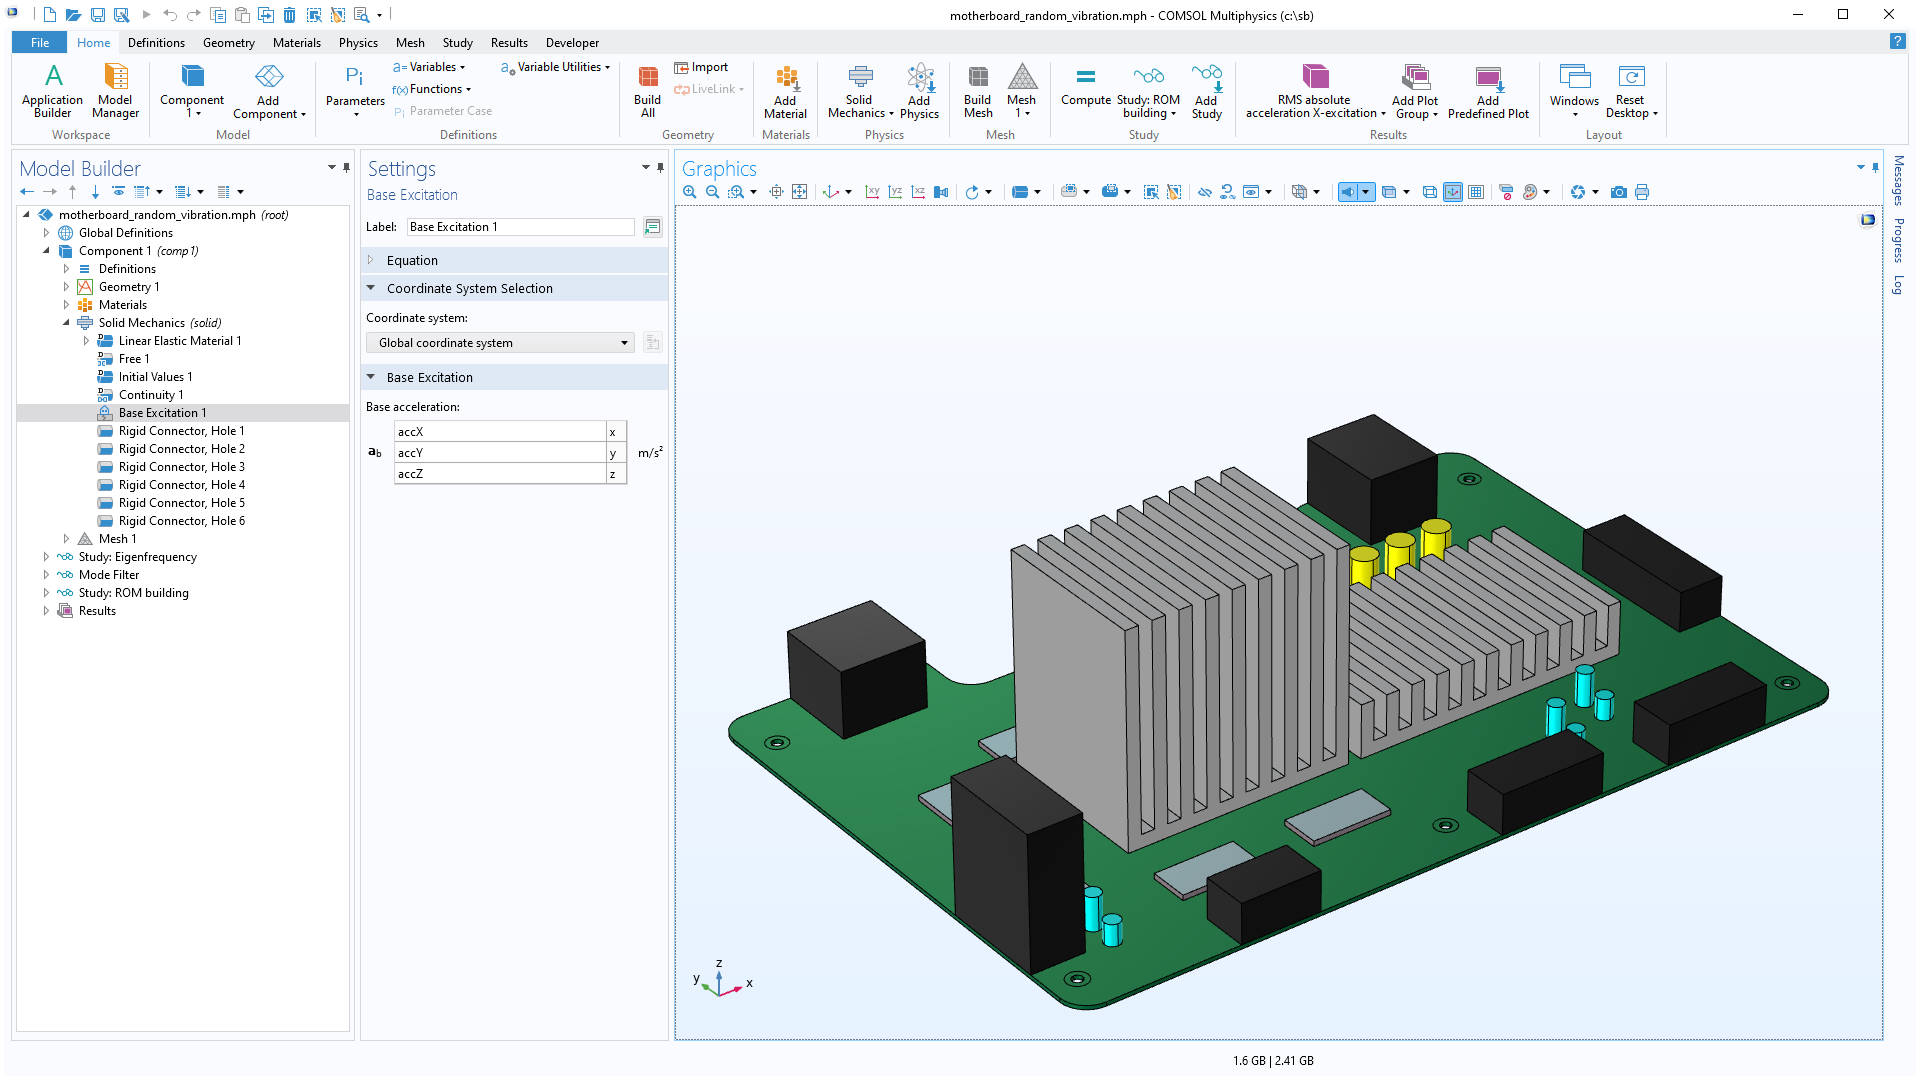 The COMSOL Multiphysics UI showing the Model Builder with the Base Excitation node highlighted, the corresponding Settings window, and a motherboard model in the Graphics window.